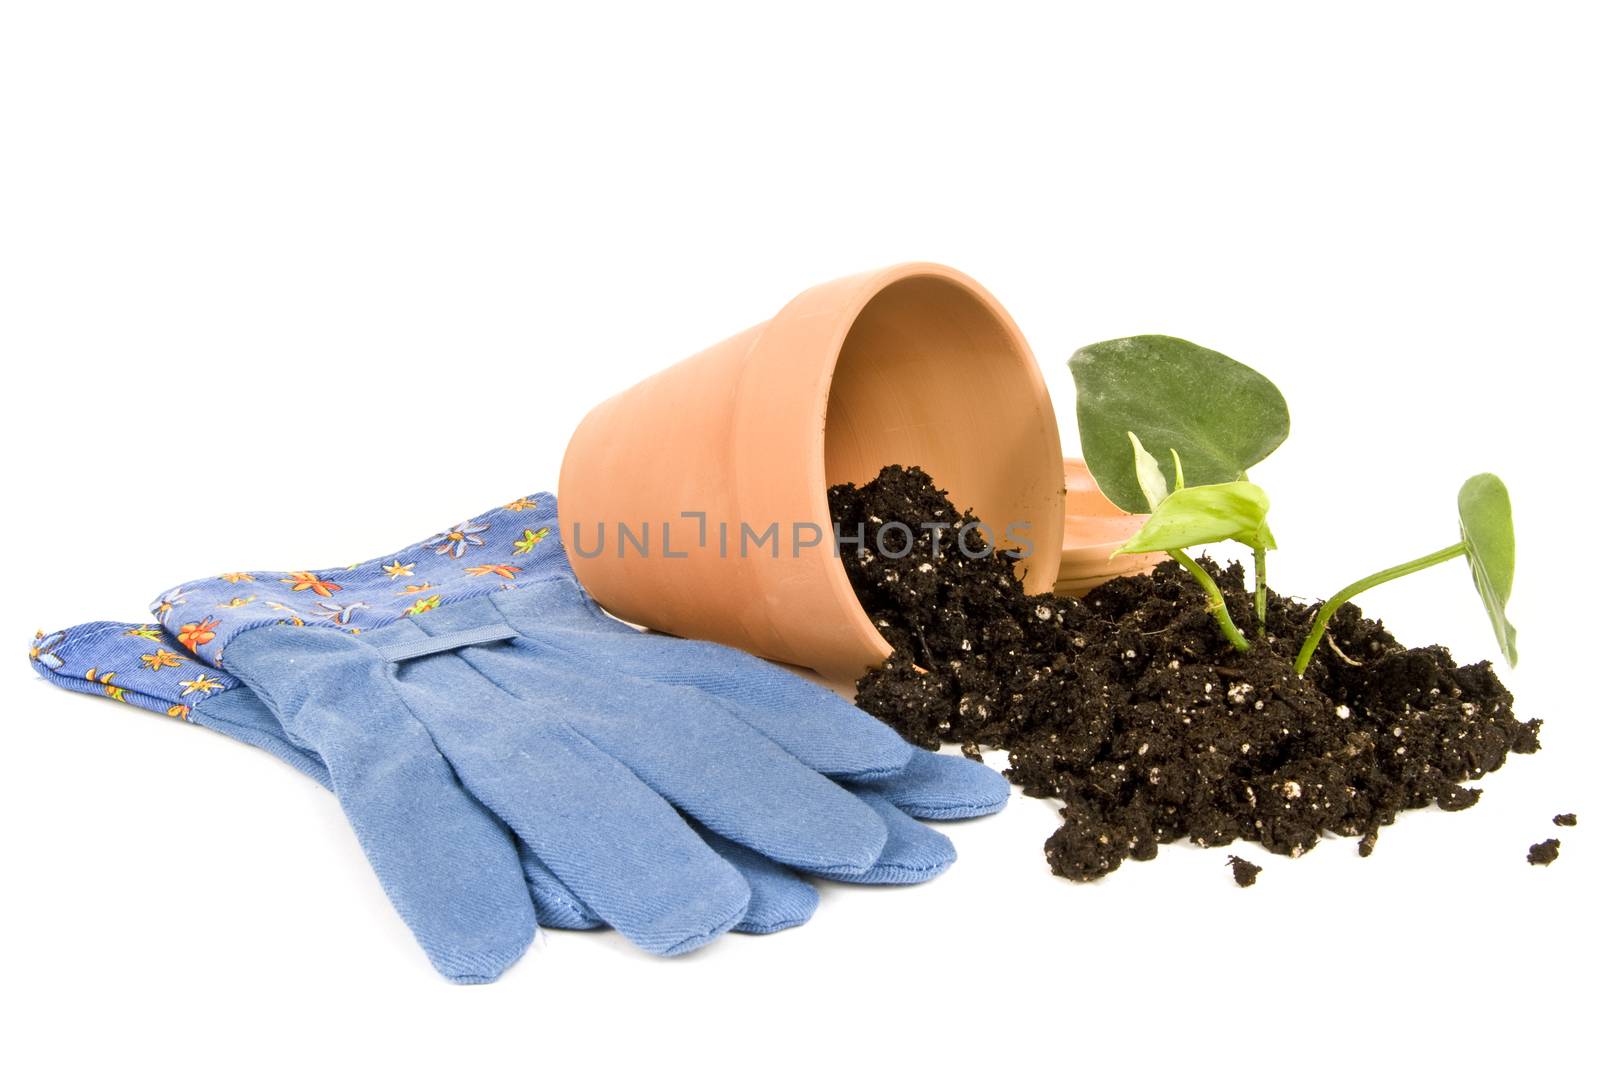 Horizontal shot of blue gardening gloves with clay flower pot, soil, and plant.  On white background.